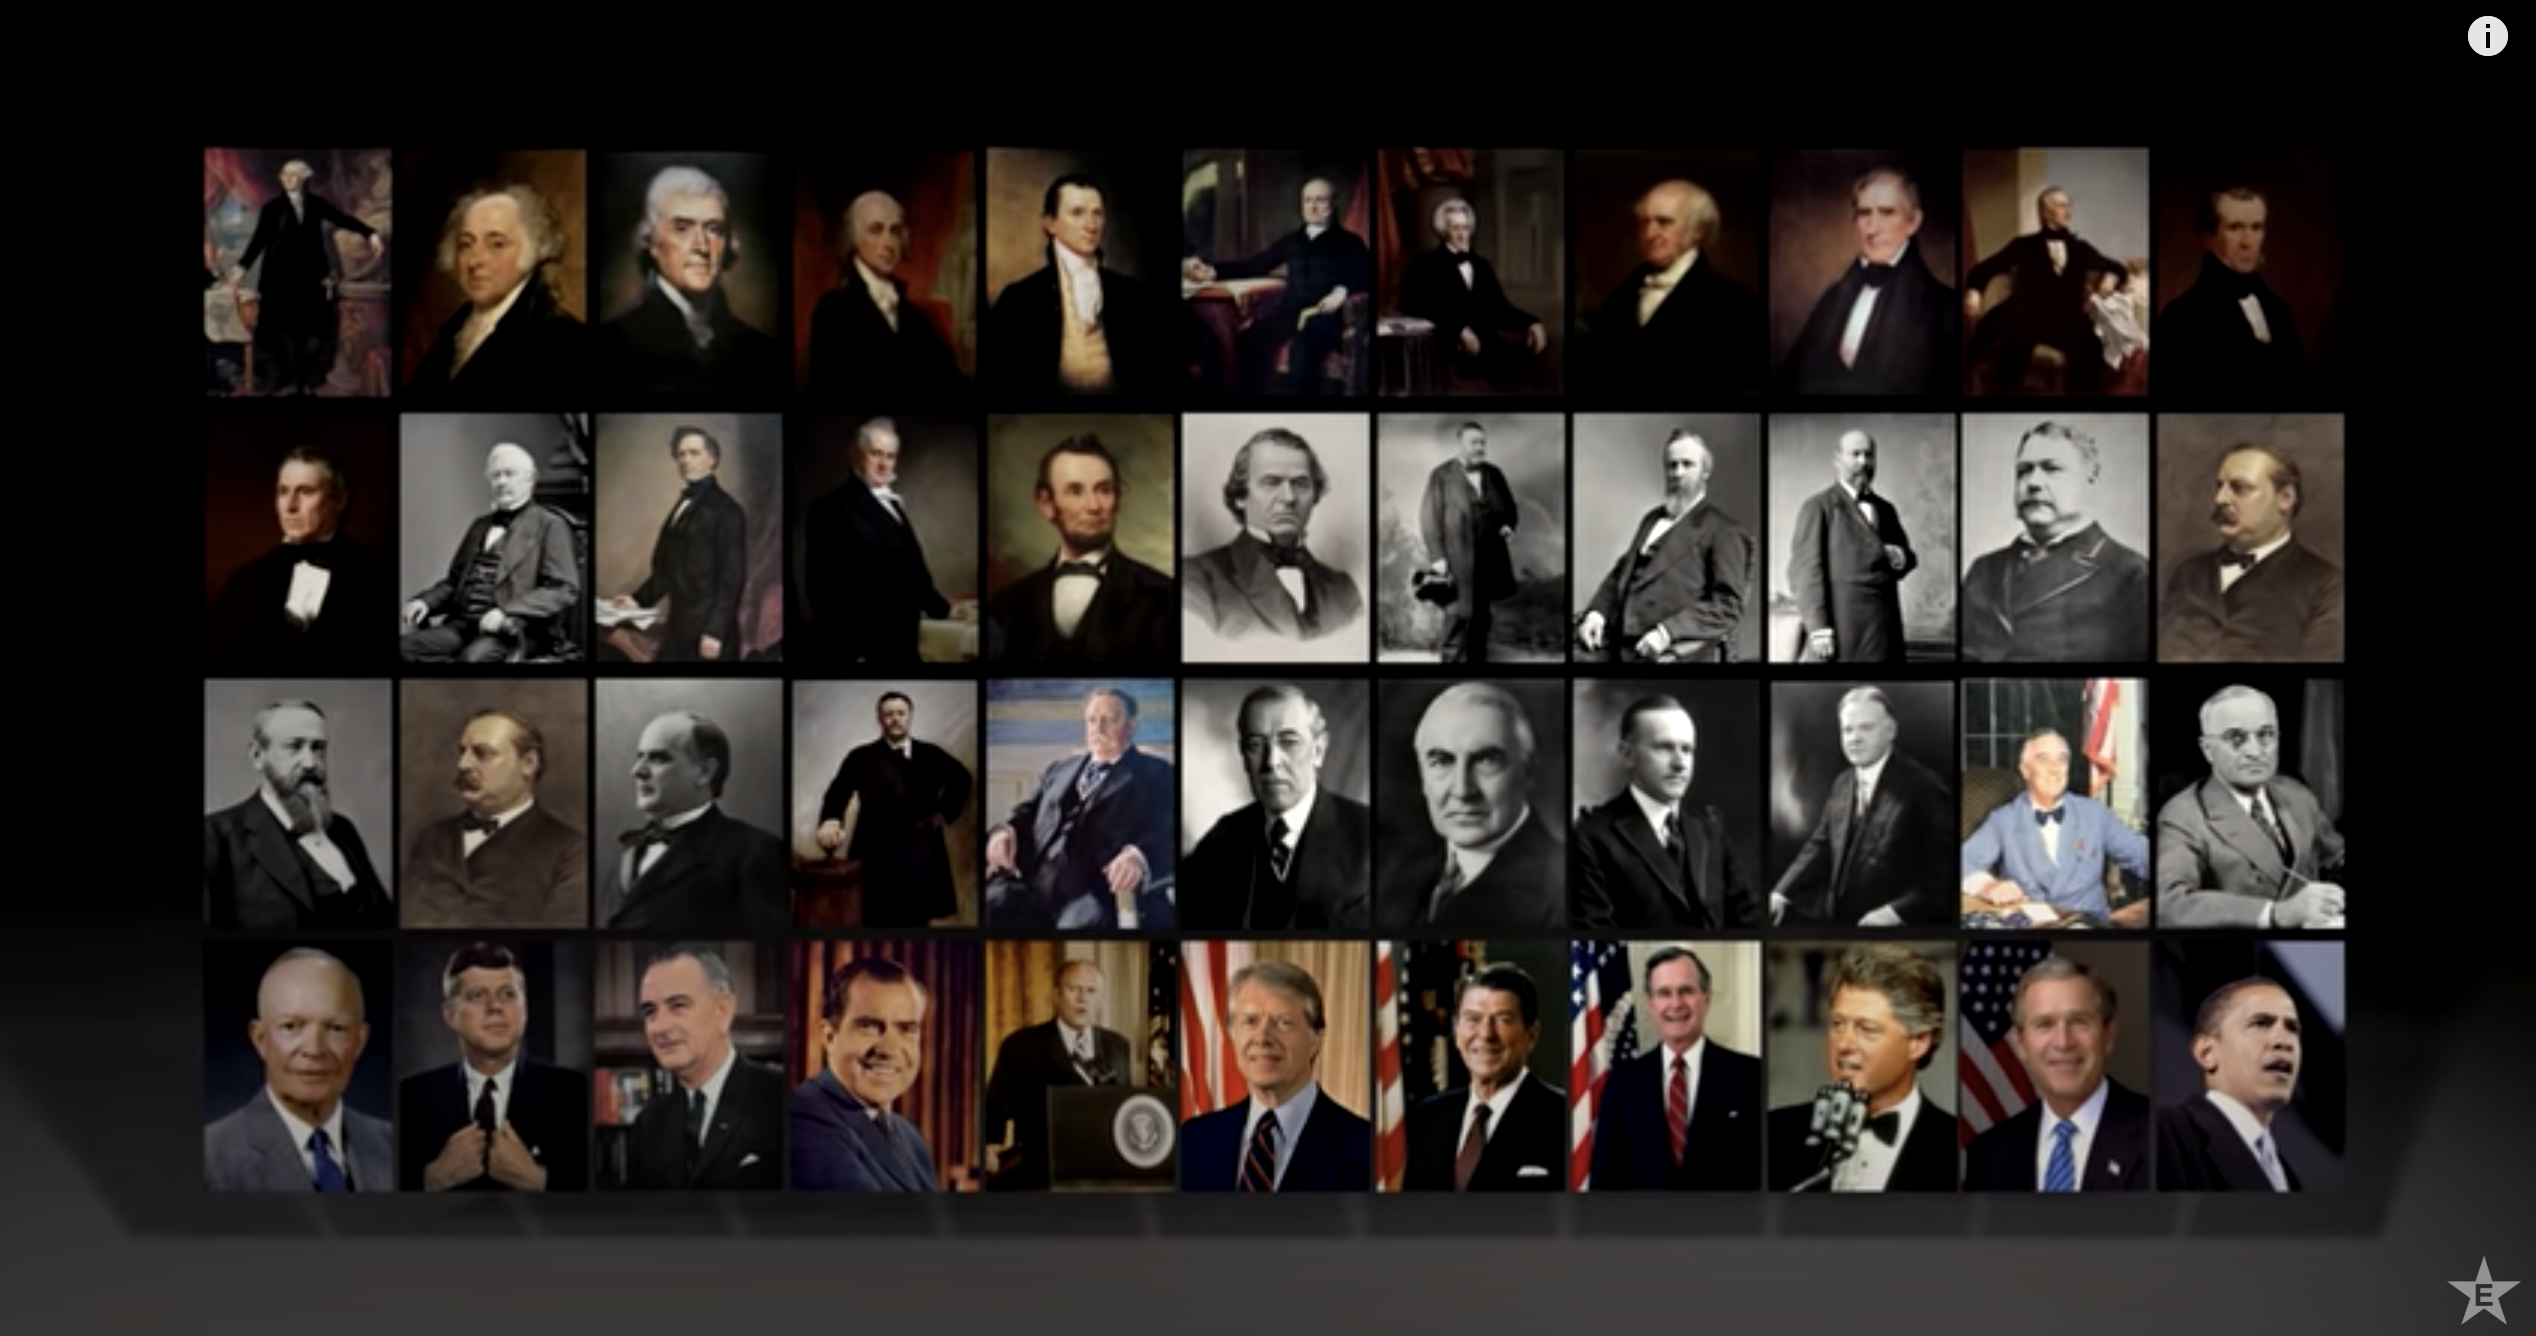 Photos and Pictures of the 45 American Presidents